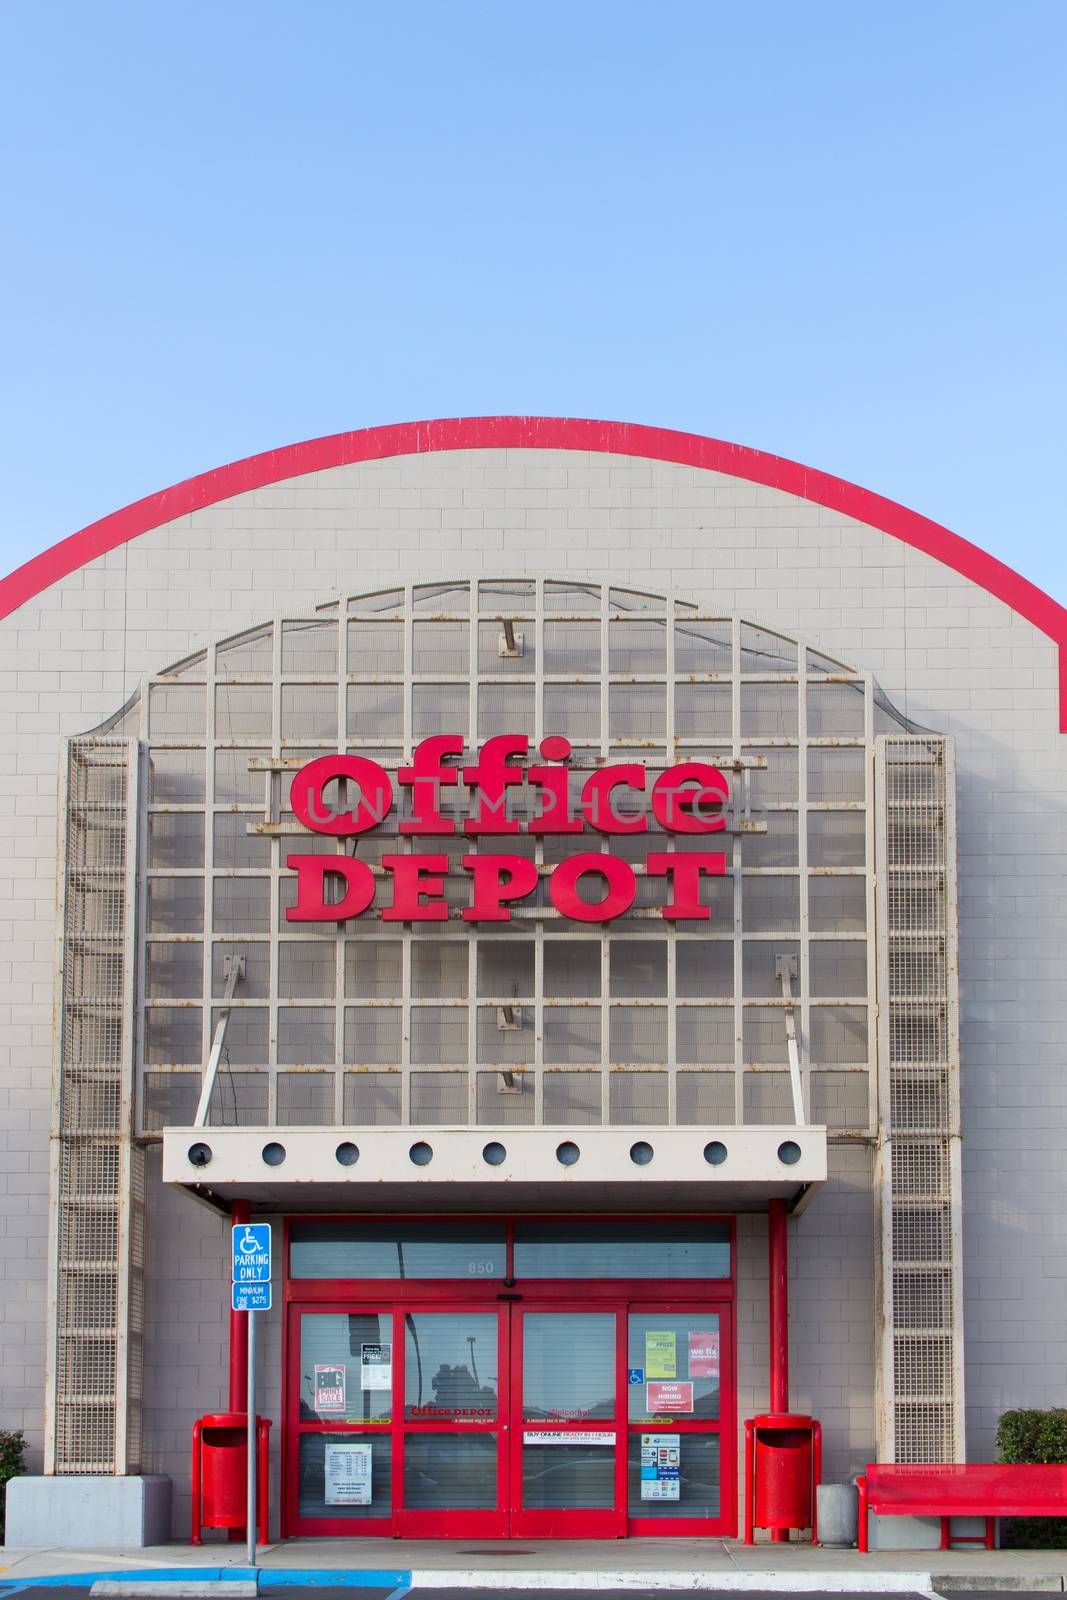 SAND CITY, CA/USA - APRIL 23, 2014: Office Depot store exterior. Office Depot, Inc. is a leading global provider of office related products and services.